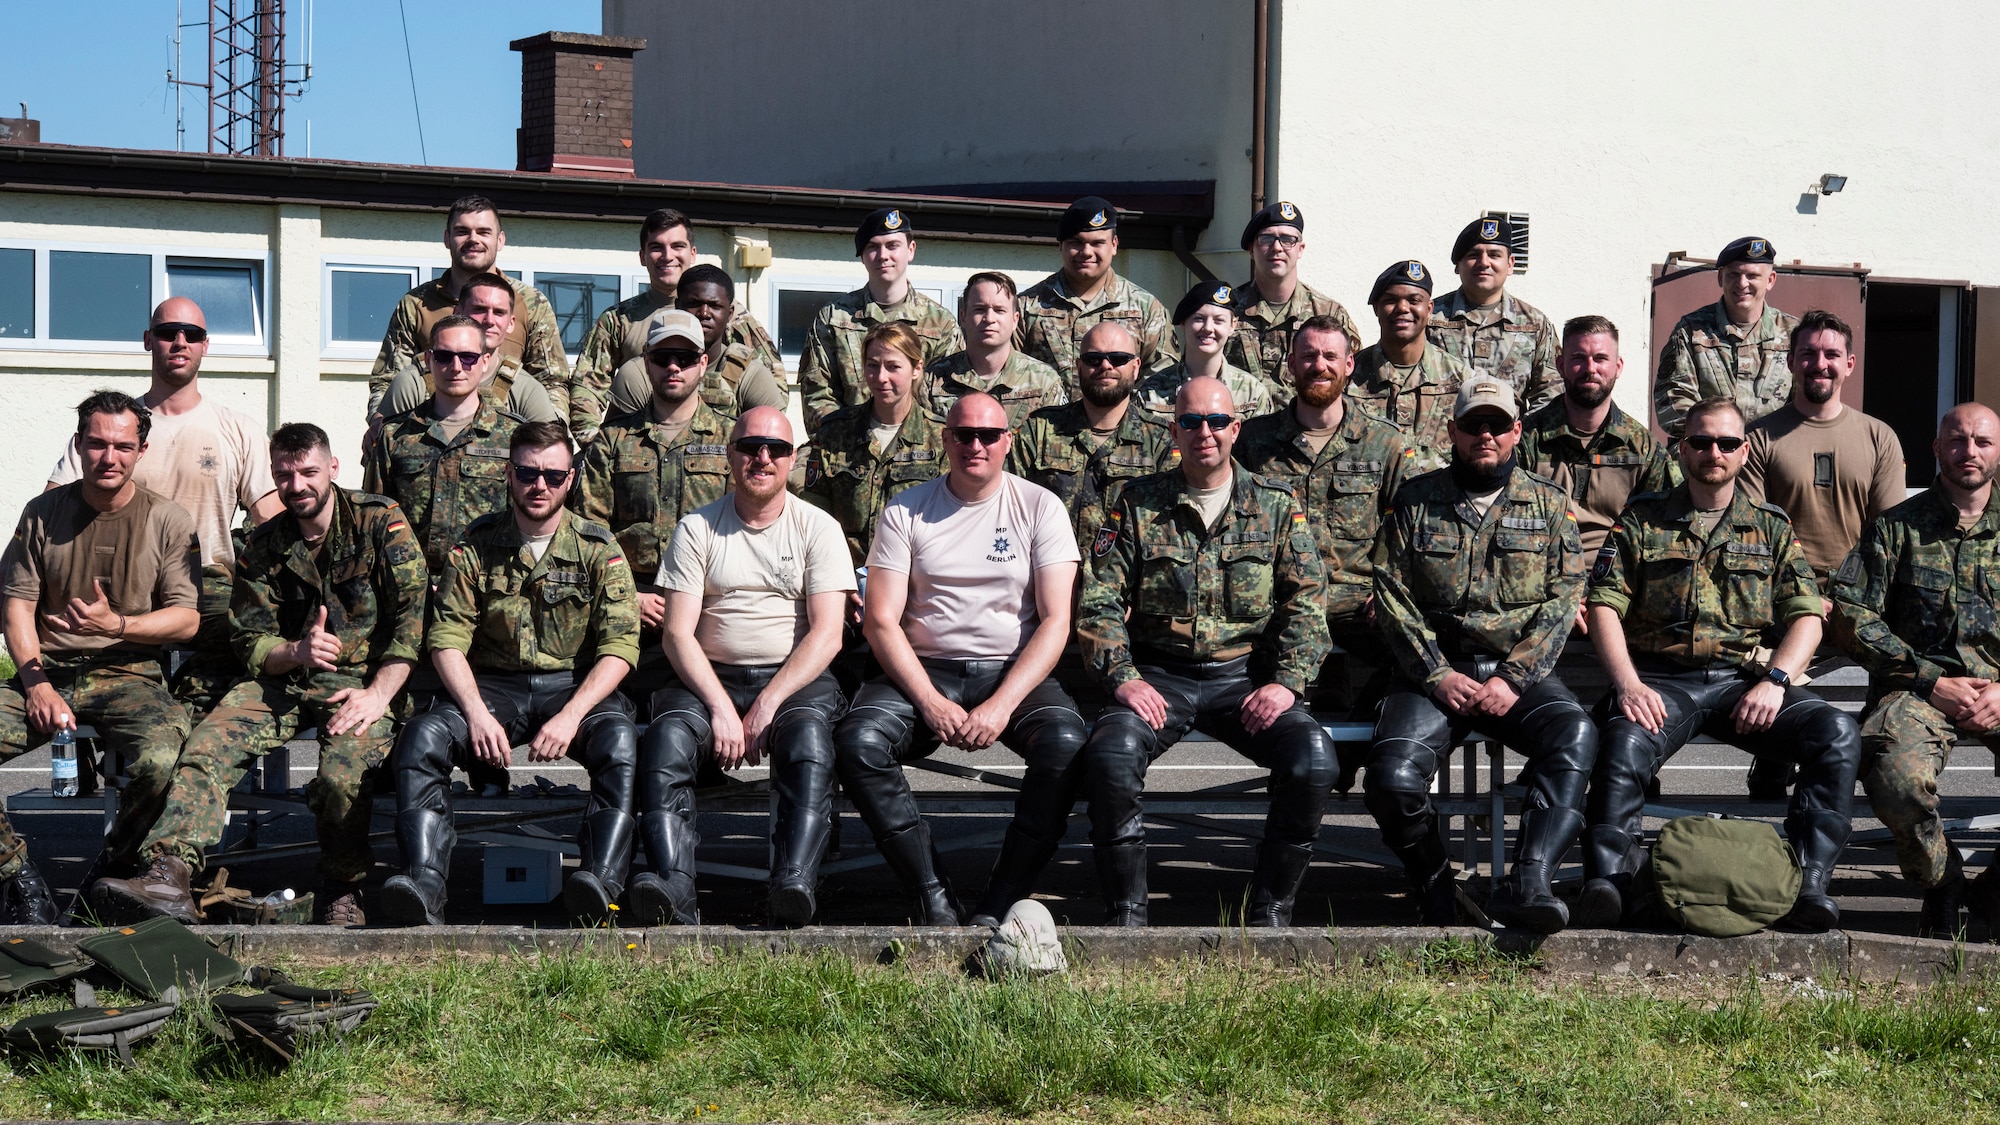 U.S. Air Force Airmen from the 52nd Security Forces Squadron and military police assigned to Germany’s Feldjäger Regiments 1 and 2 sit for a group photo at Spangdahlem Air Base, Germany, June 2, 2021.